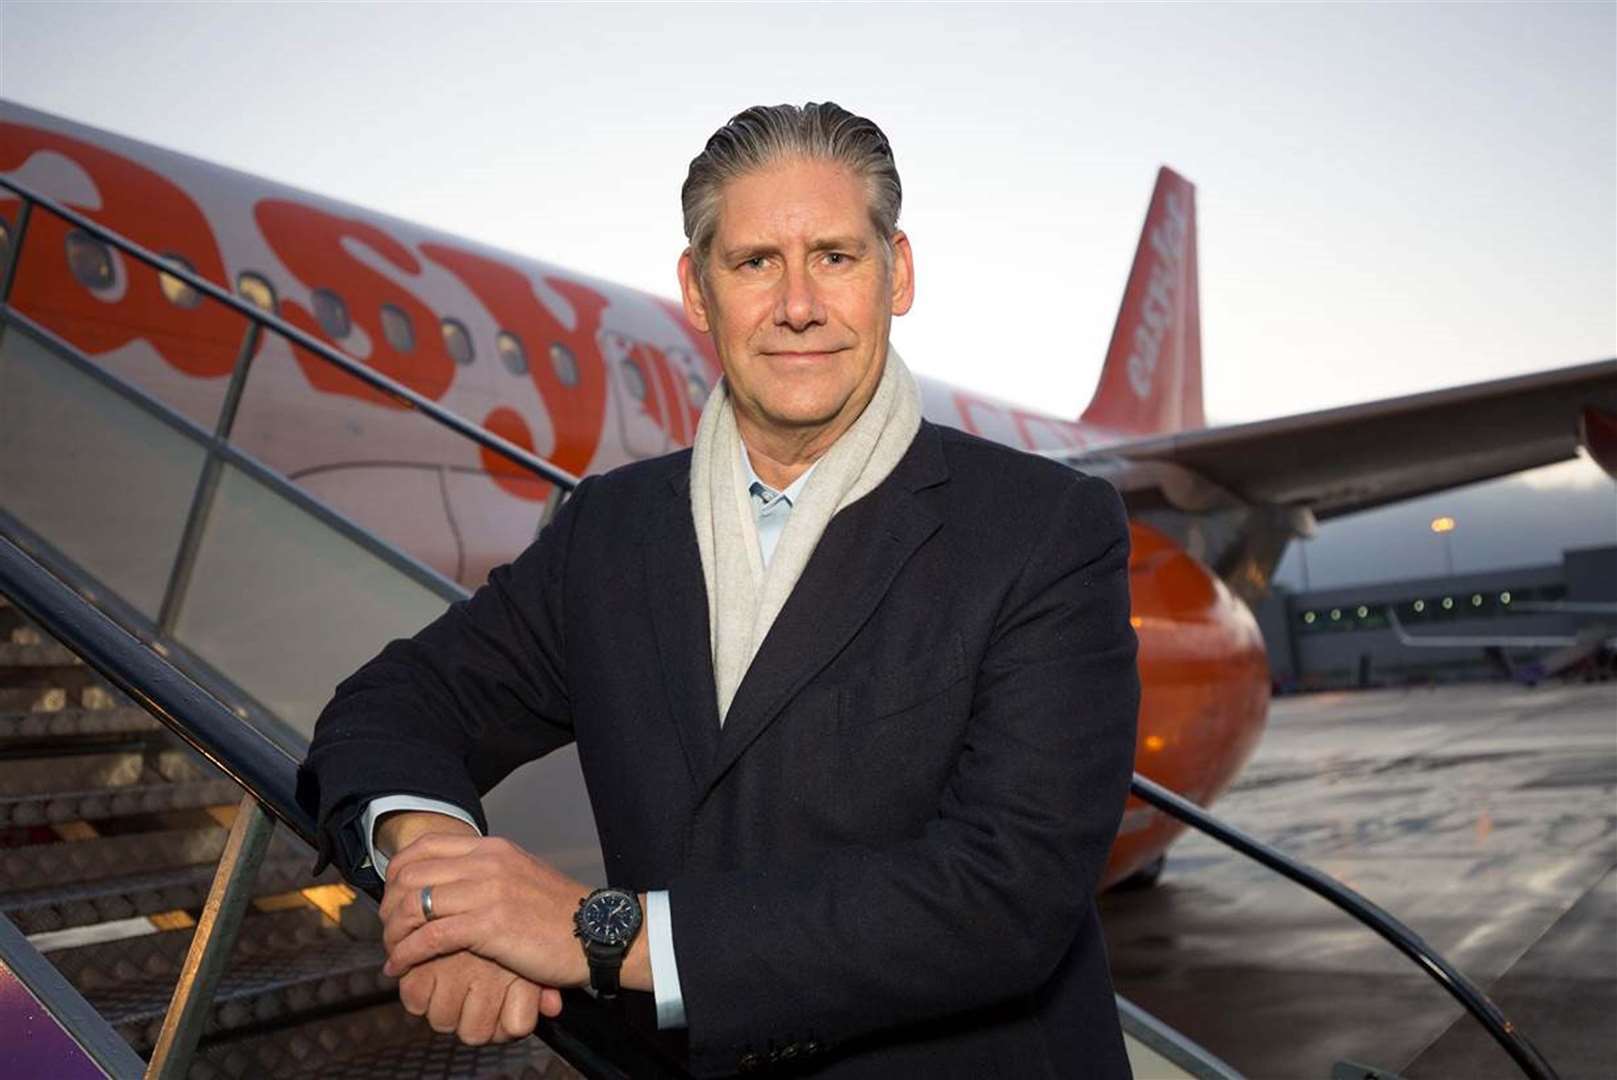 EasyJet boss Johan Lundgren said ‘billions of euros have been poured into a number of our competitors’ (easyJet/PA)